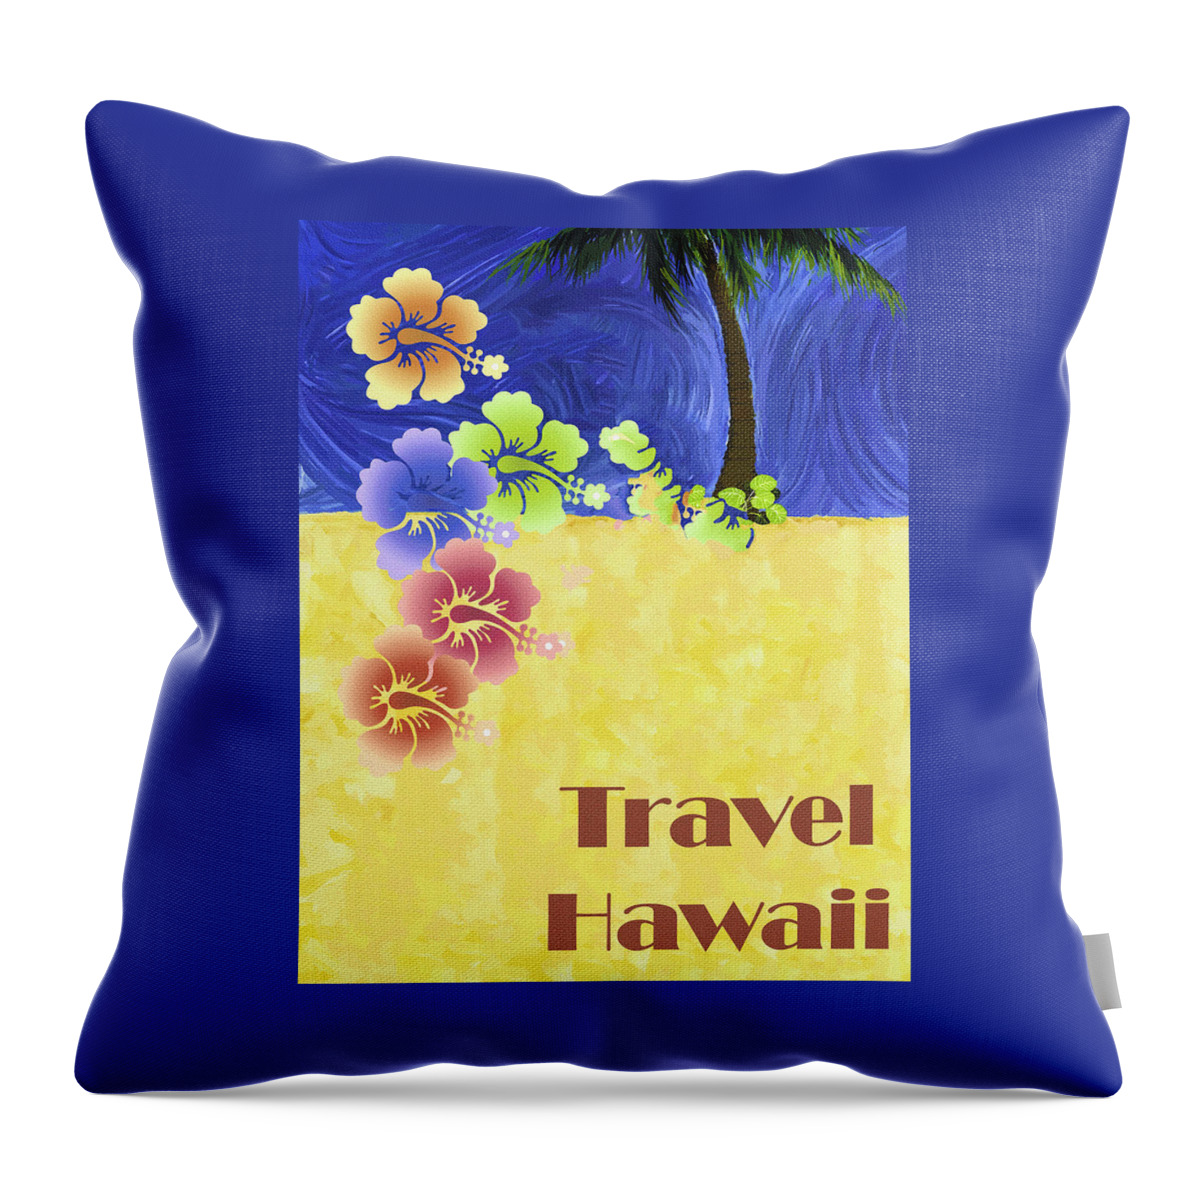 Hawaii Throw Pillow featuring the photograph Travel Hawaii Vintage Poster by Carol Japp